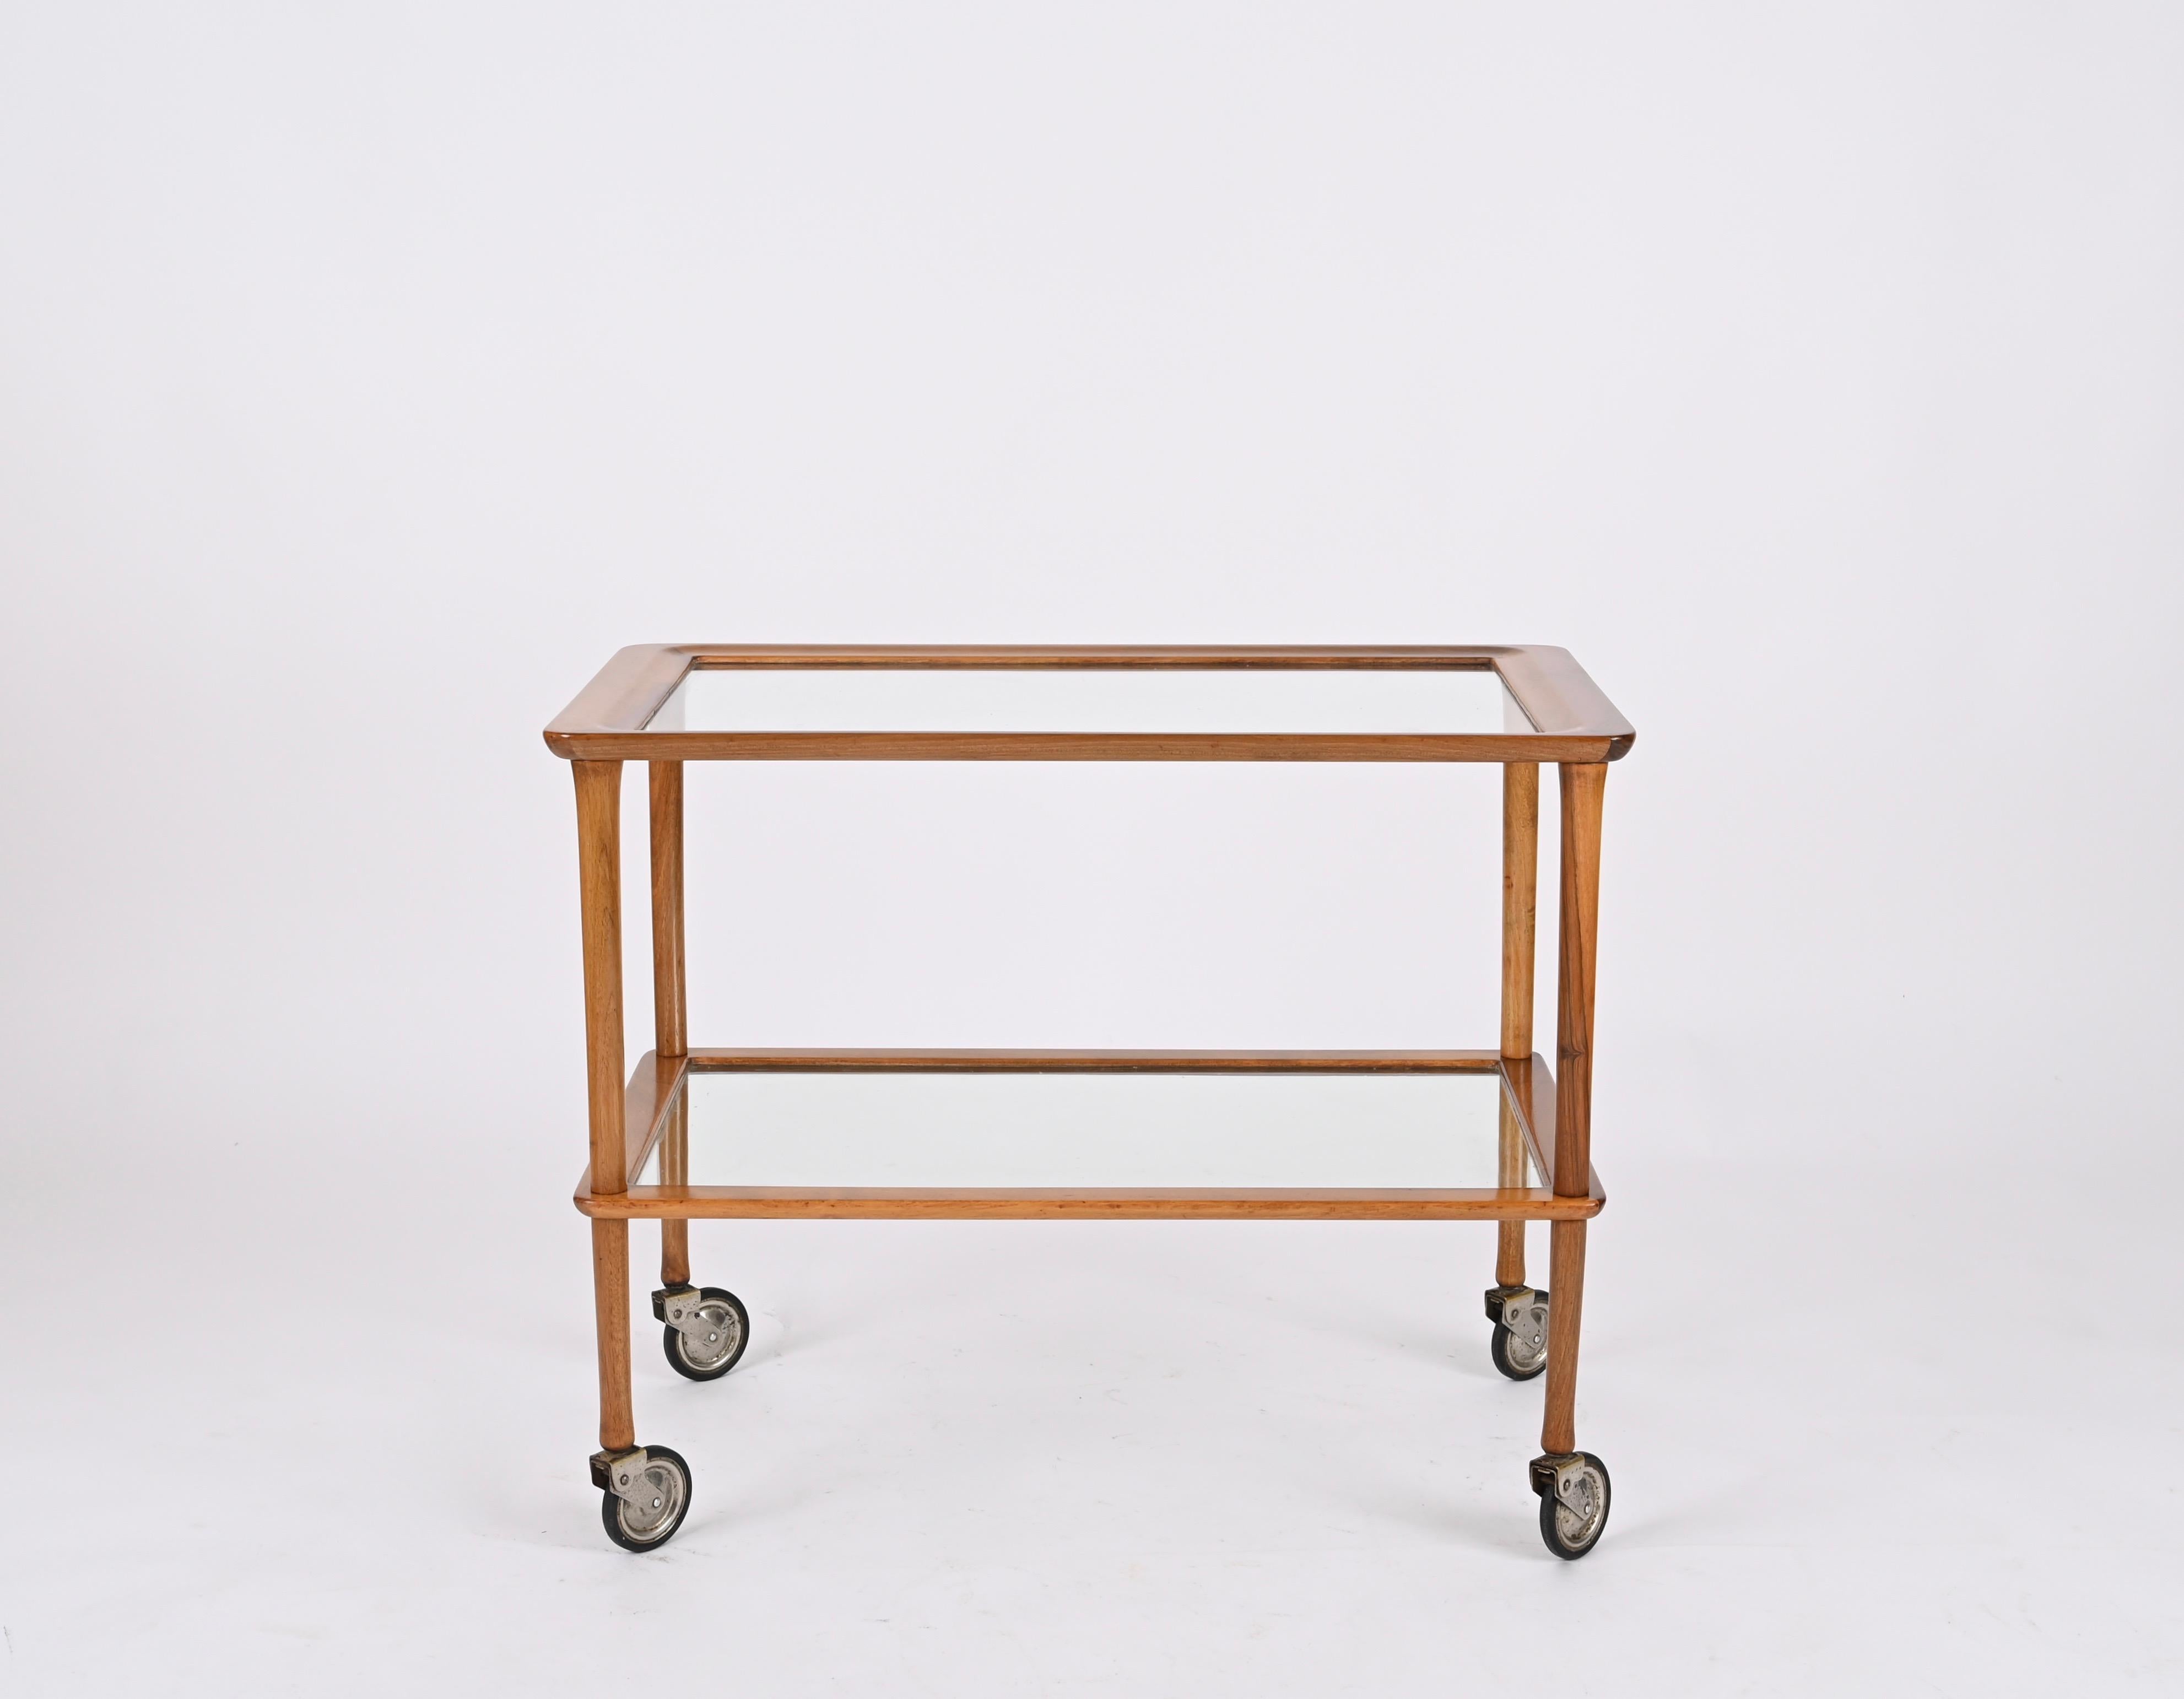 Stunning Mid-Century serving bar cart fully made in solid walnut wood. This fantastic cart was designed by cesare Lacca in Italy during the 1960s.

The straight simple lines and the quality of the beautiful blonde walnut wood make this cart